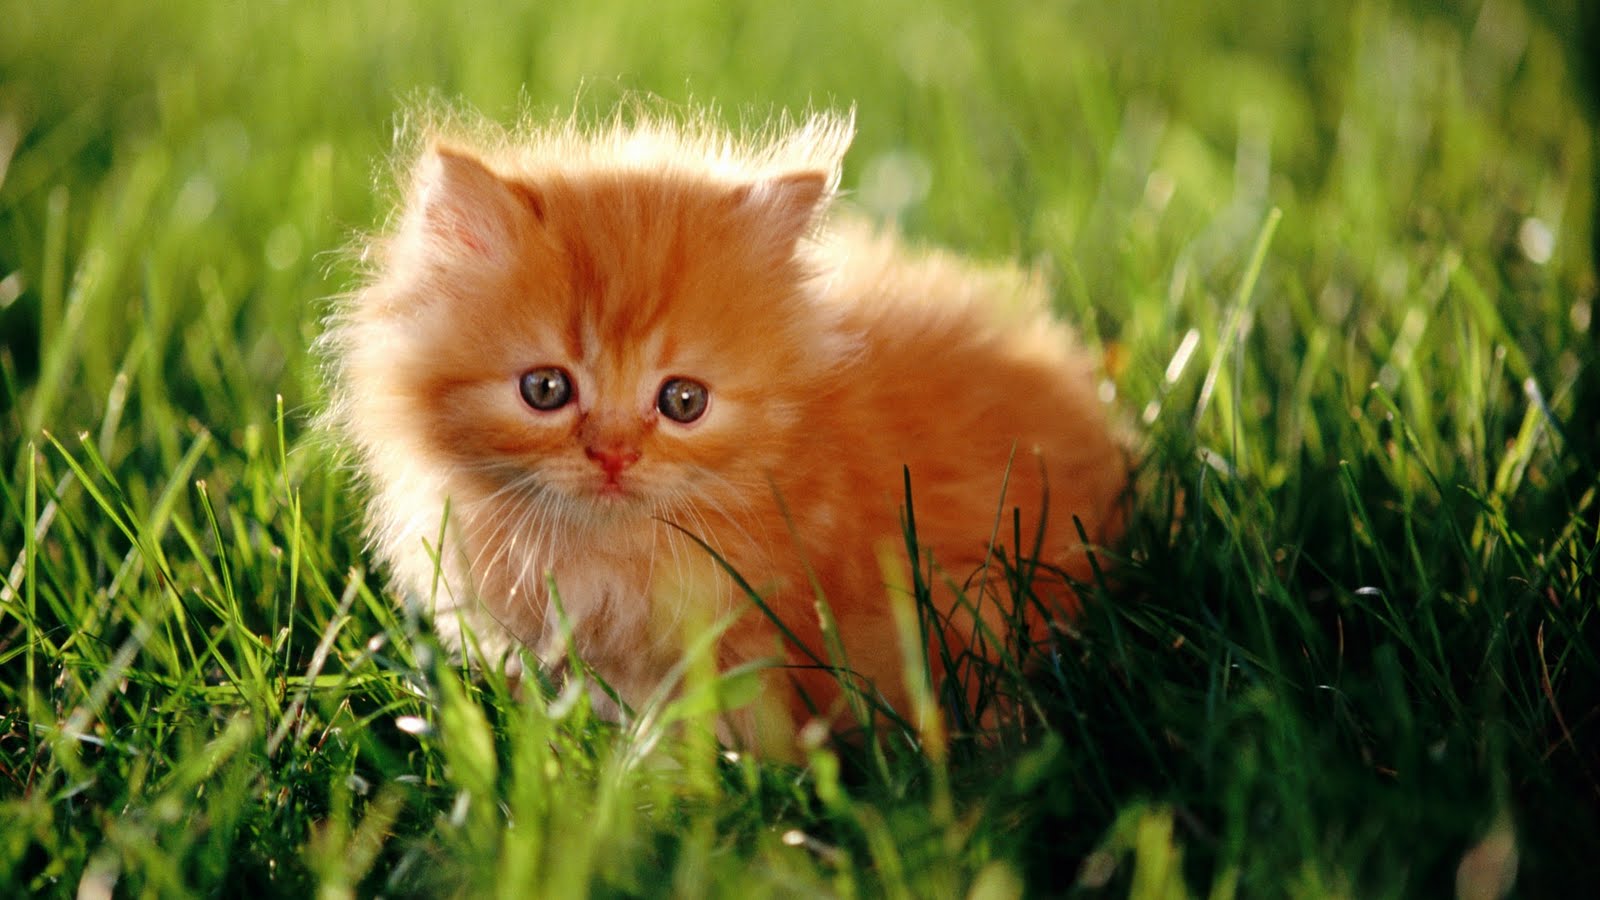 How To Download Kitten In Grass